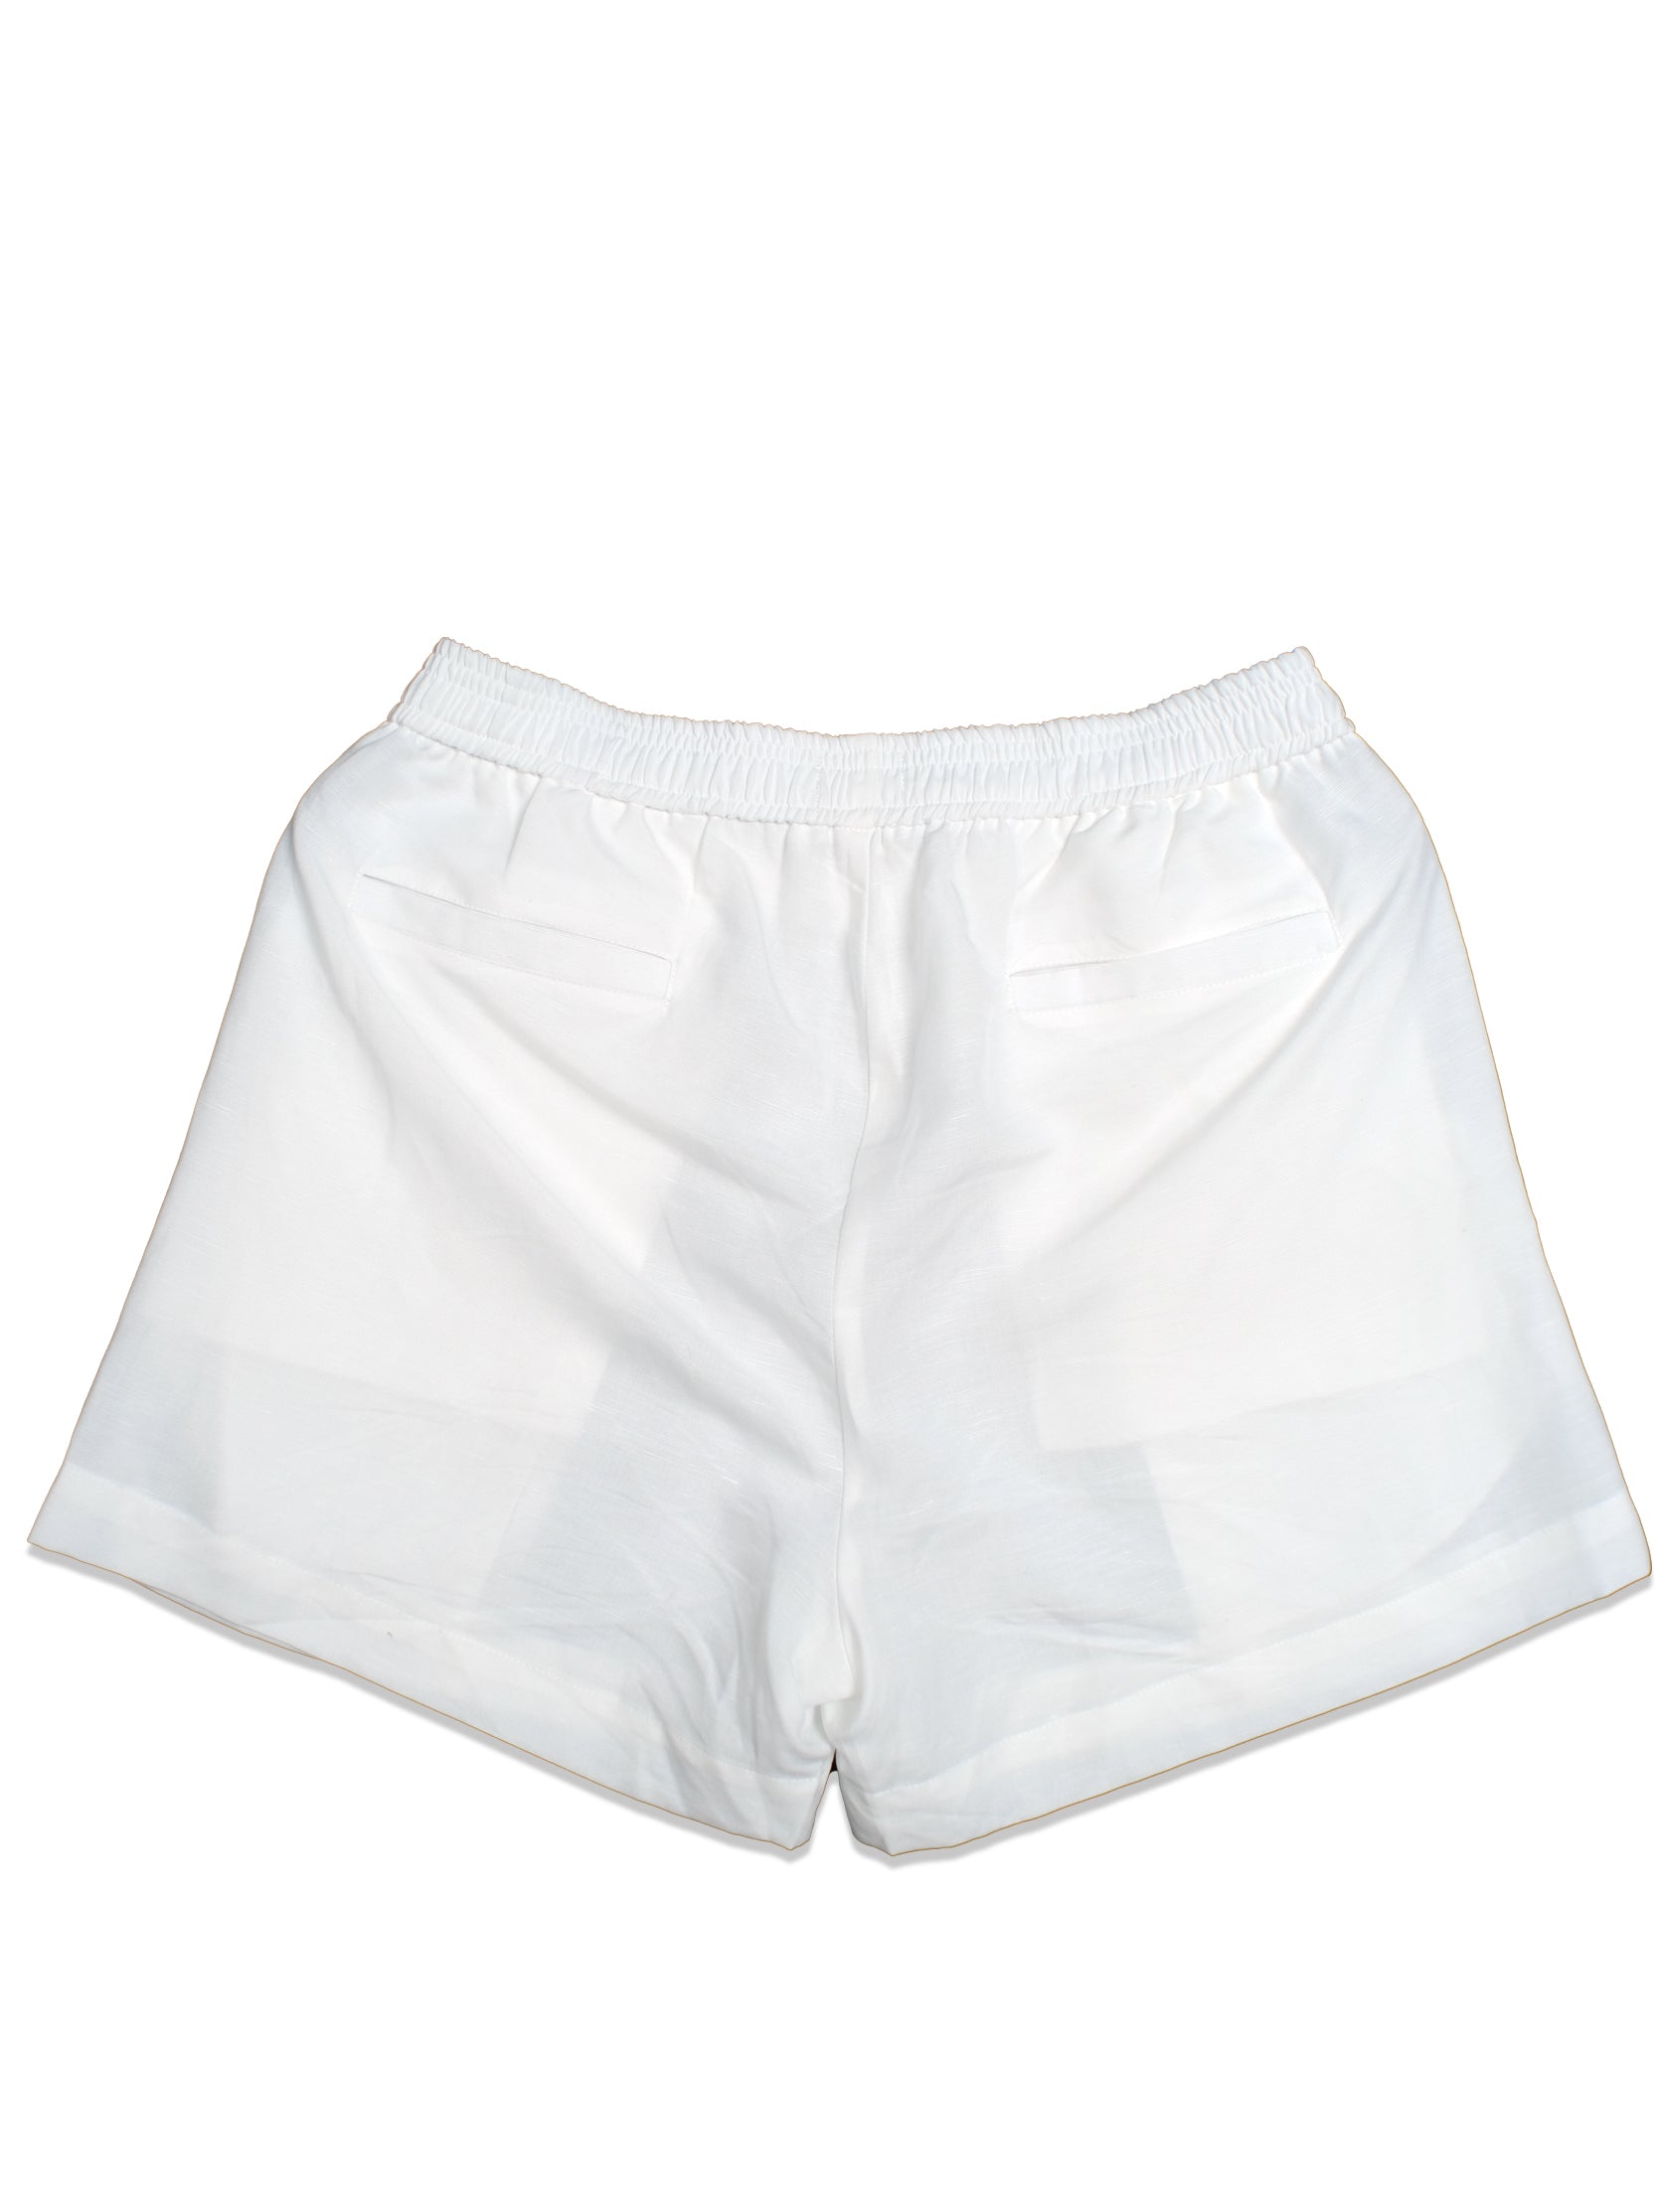 EASY SHORTS in white